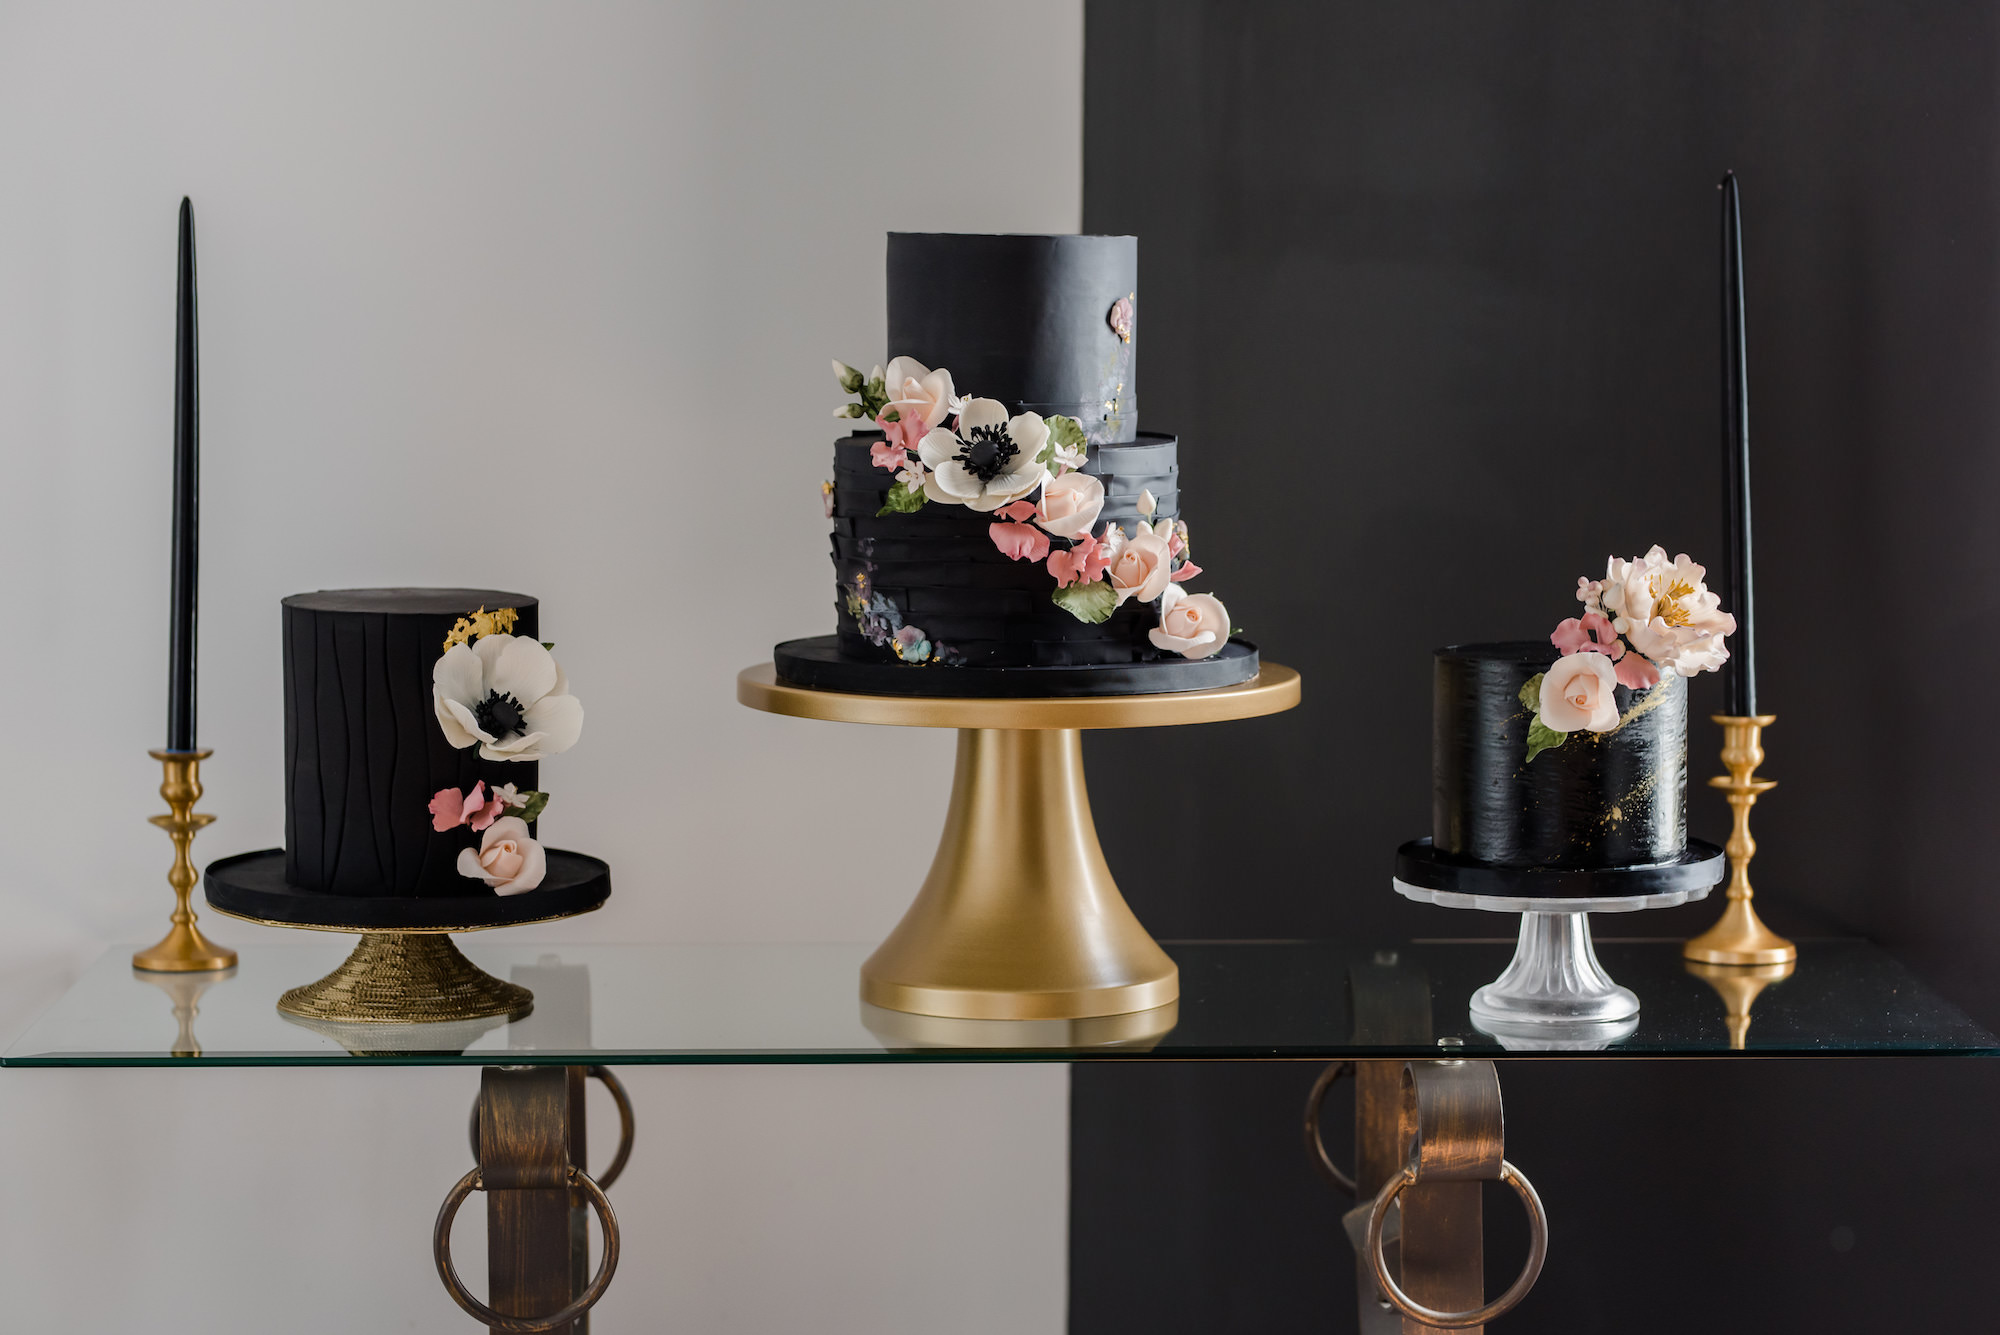 Dark Luxe, Unique Three Separate Black Wedding Cakes with Cascading Blush Pink and Anemone Flowers | Tampa Wedding Cake Company Tampa Bay Cake Company | Wedding Planner Elegant Affairs by Design